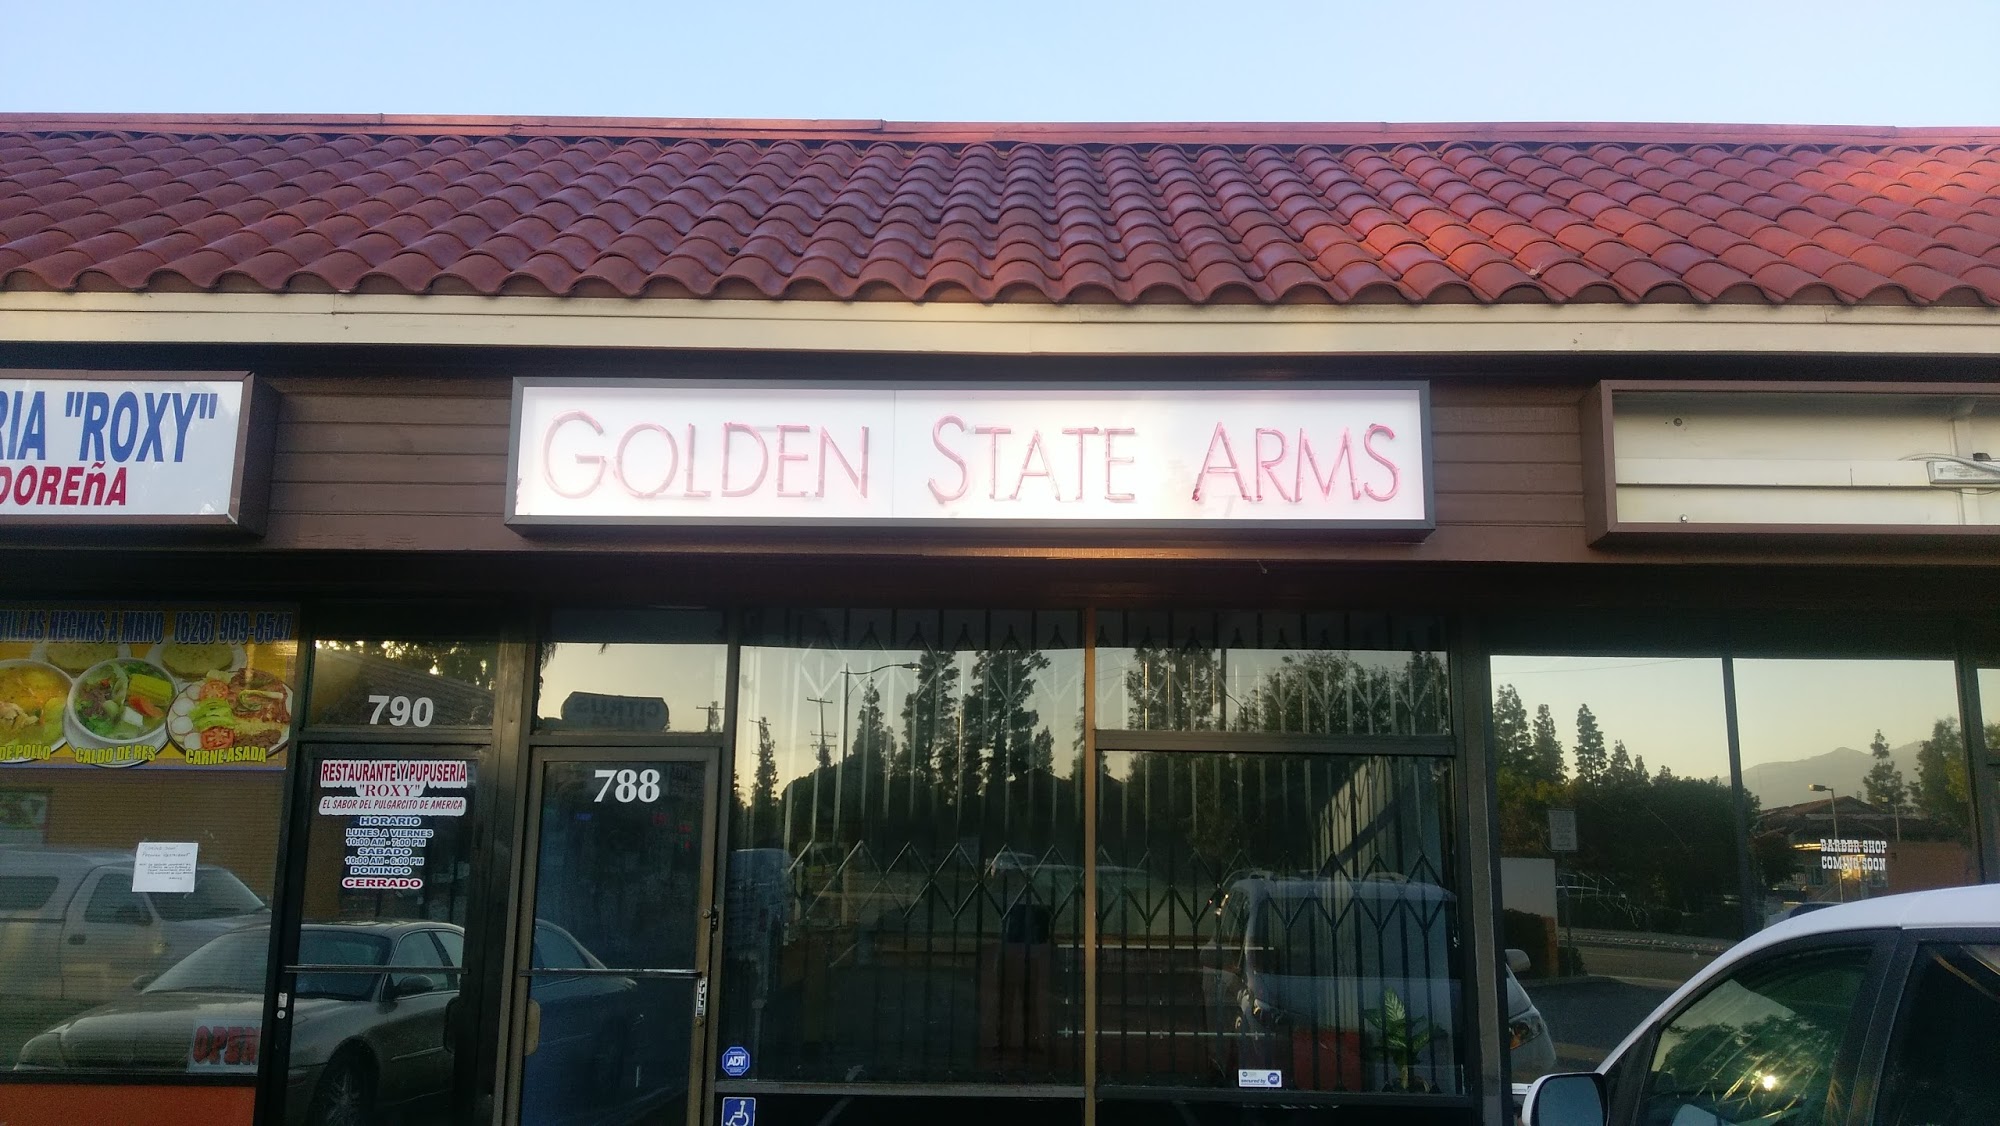 Golden State Arms